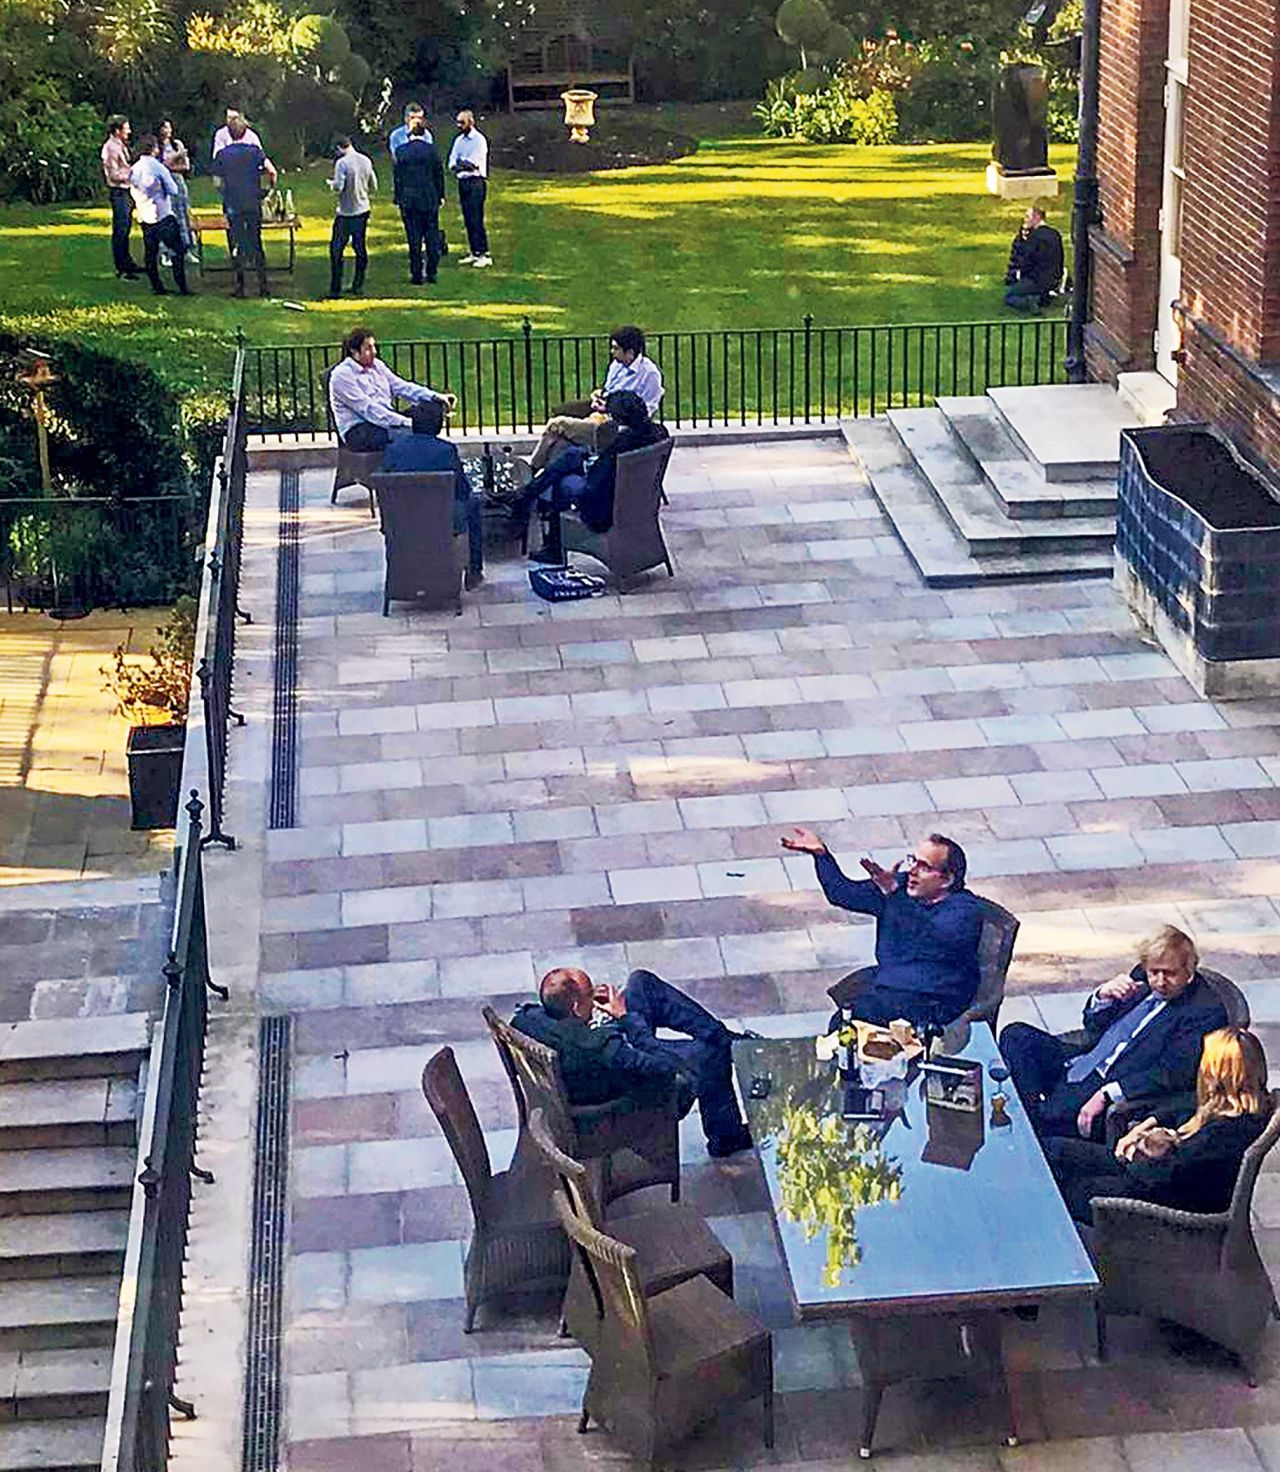 Johnson and staff members are pictured together with wine at a Downing Street garden in May 2020. In January 2022, <a href="https://www.cnn.com/2022/01/12/uk/boris-johnson-pmqs-downing-street-party-intl-gbr/index.html" target="_blank">Johnson apologized</a> for attending the event, which took place when Britons were prohibited from gathering due to strict coronavirus restrictions.